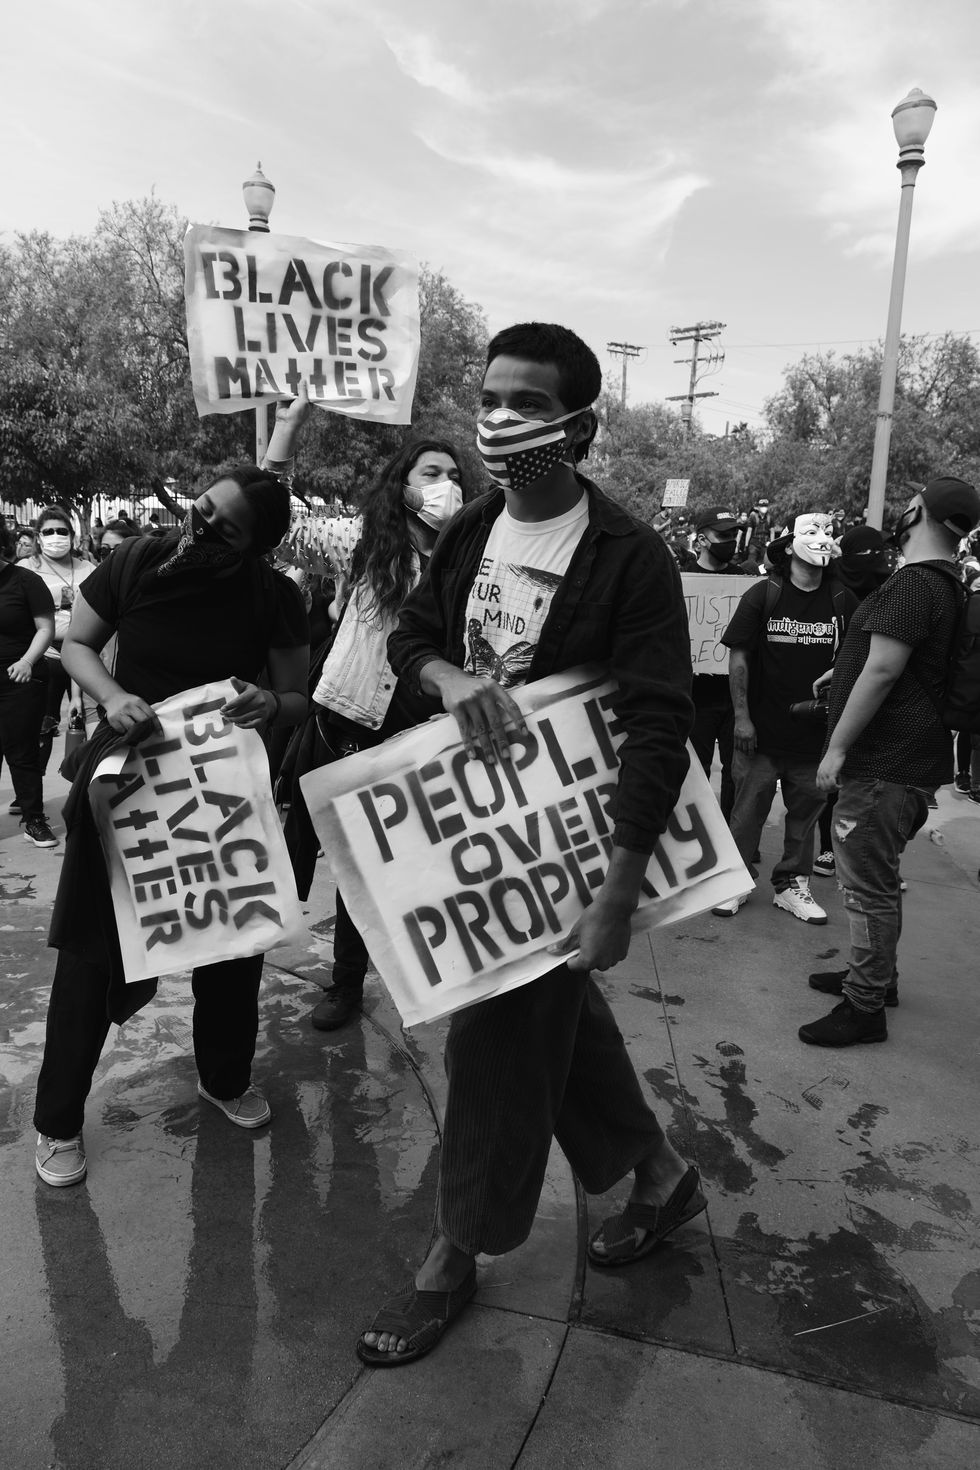 Ways You Can Help Educate Yourself And Support The Black Lives Matter Movement